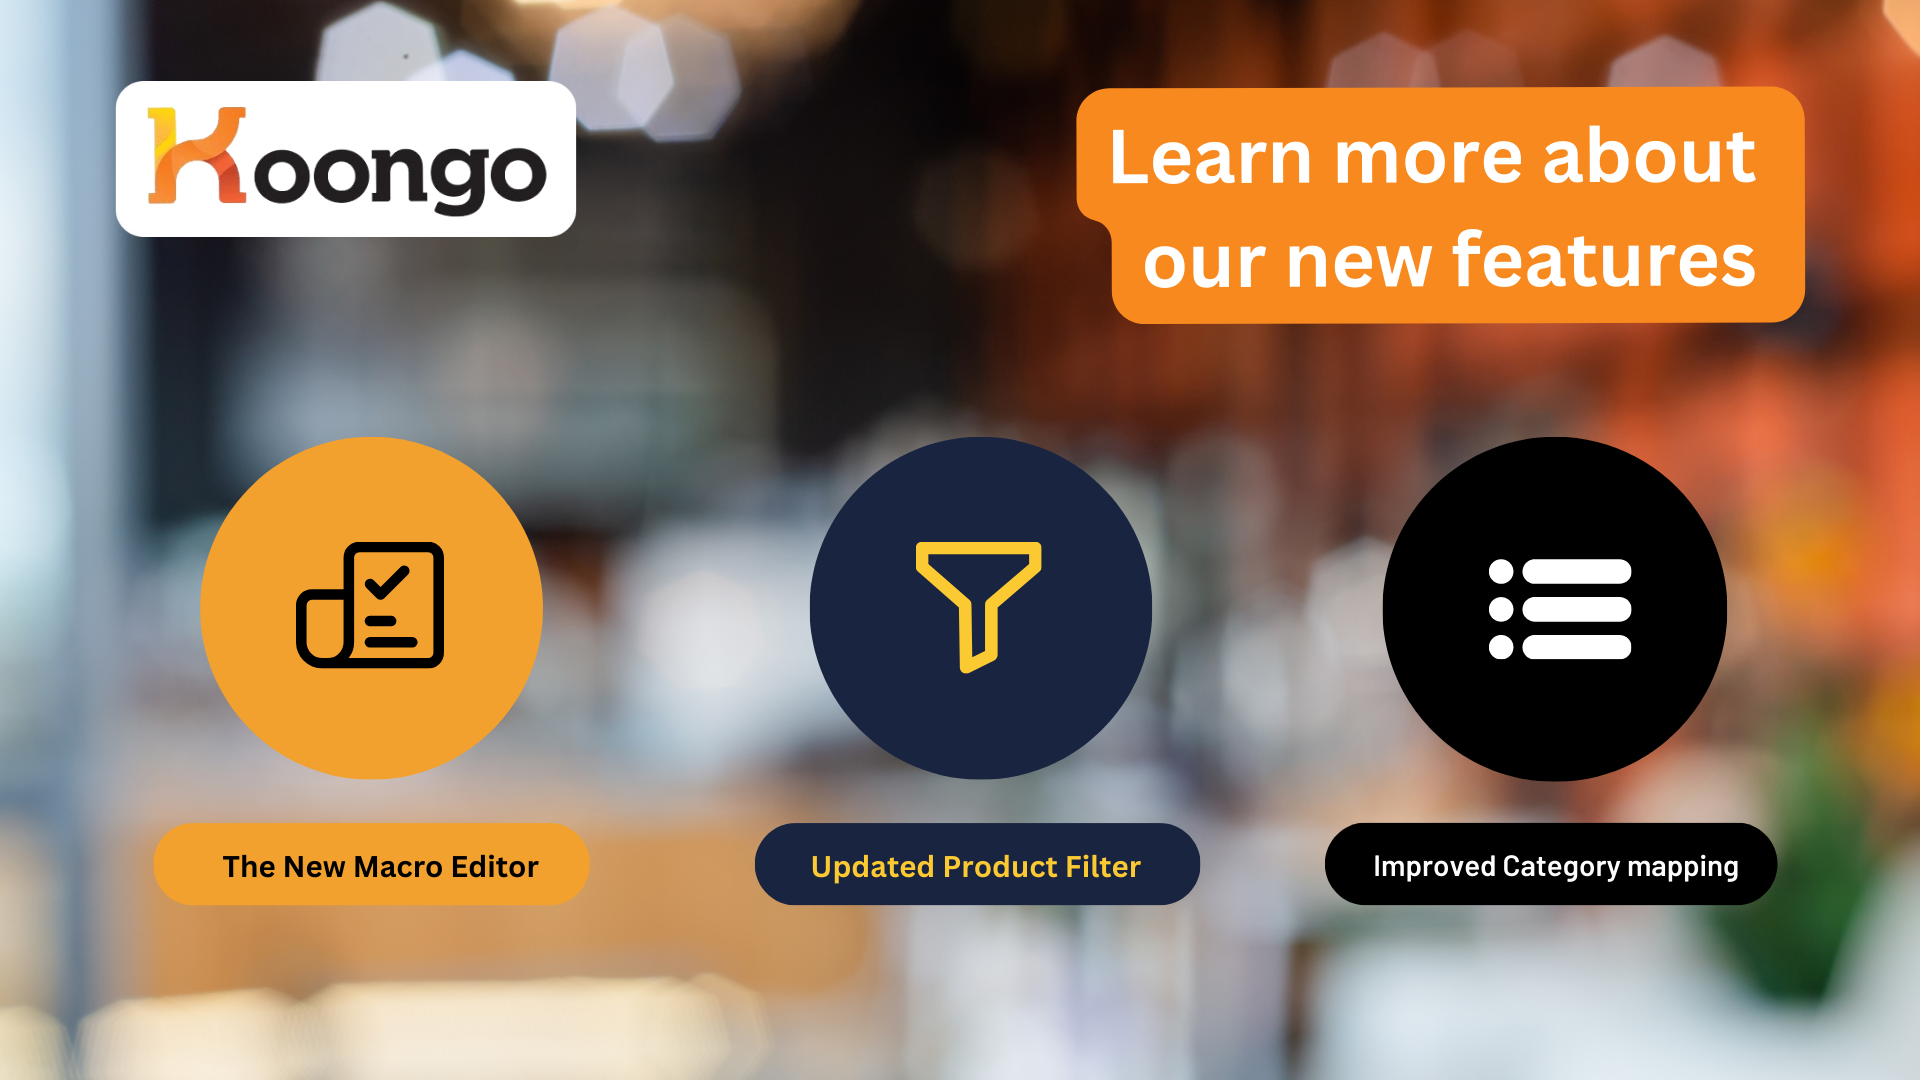 The New Features of Koongo Will Help Improve Your Business Even More